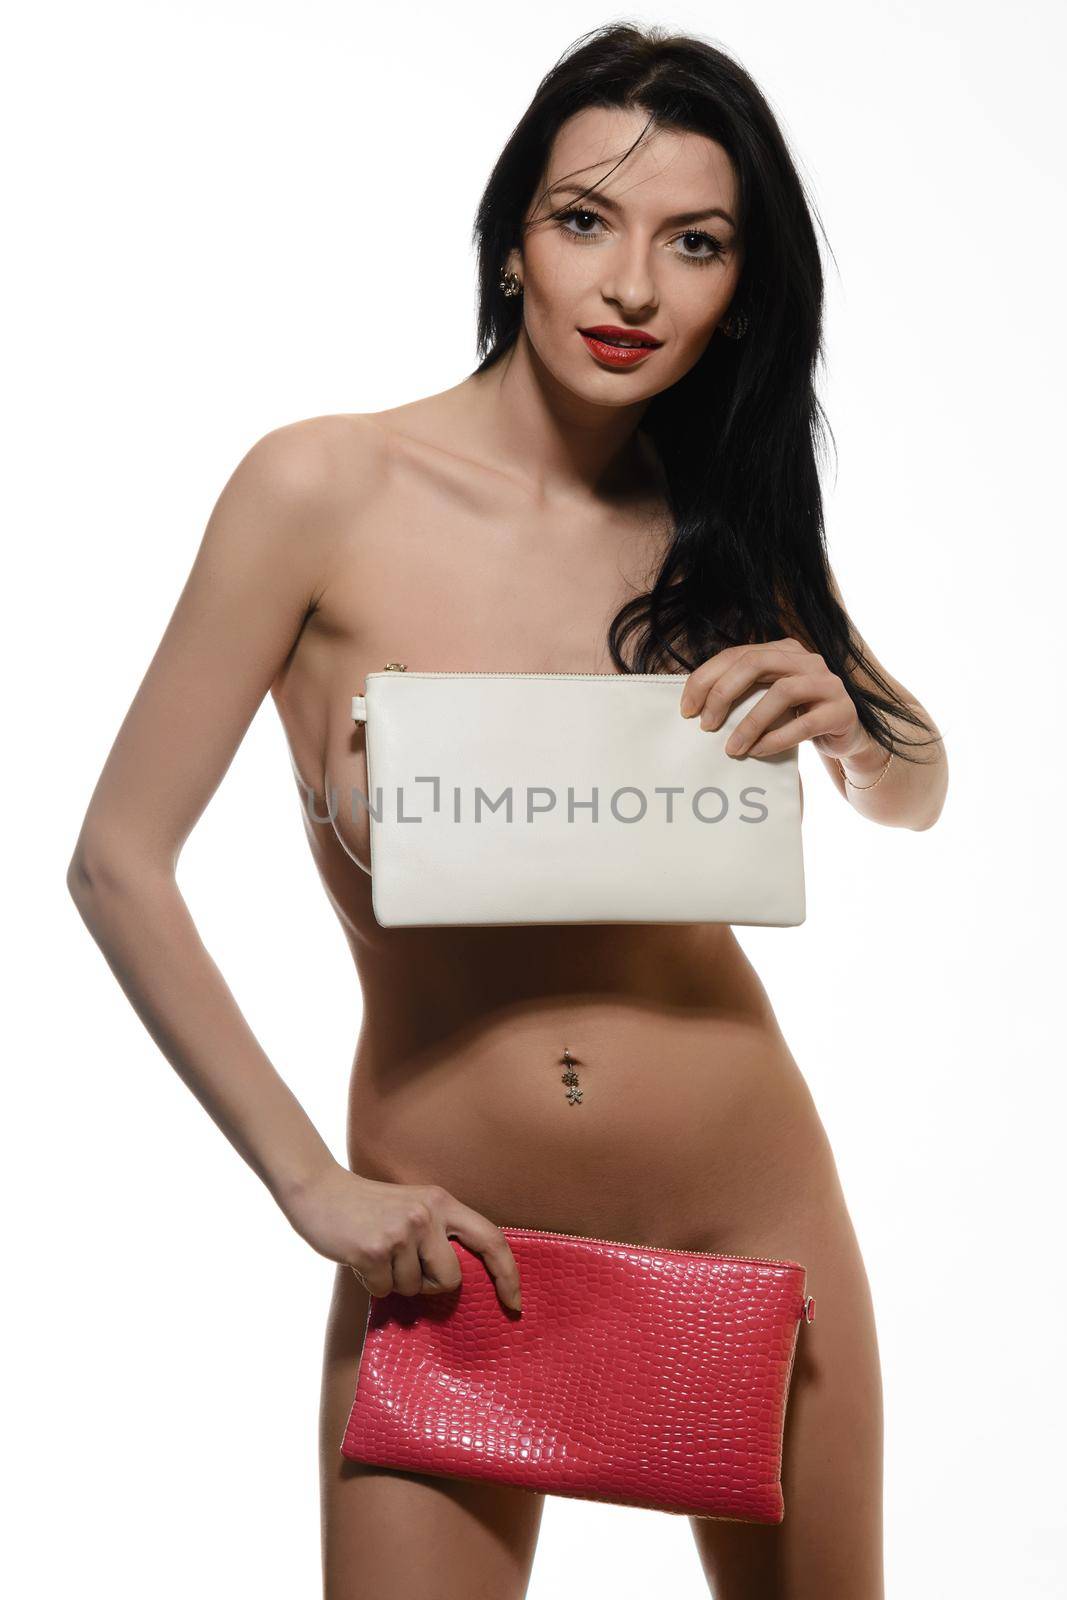 Naked young girl holding red and white leather handbag white background